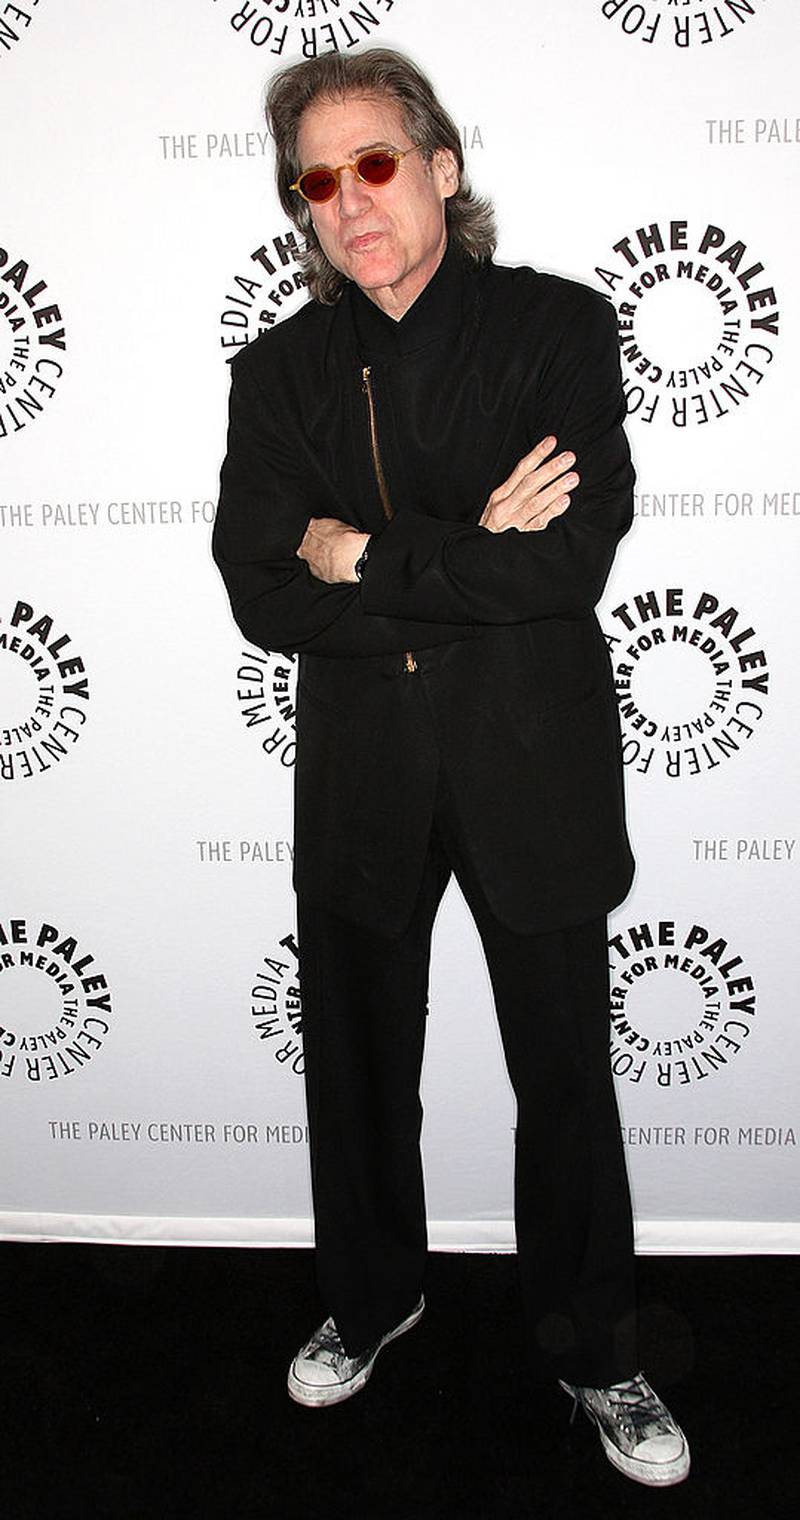 BEVERLY HILLS, CA - MARCH 14:  Comedian Richard Lewis attends the 27th annual PaleyFest Presents "Curb Your Enthusiasm" event at the Saban Theatre on March 14, 2010 in Beverly Hills, California.  (Photo by Frederick M. Brown/Getty Images)